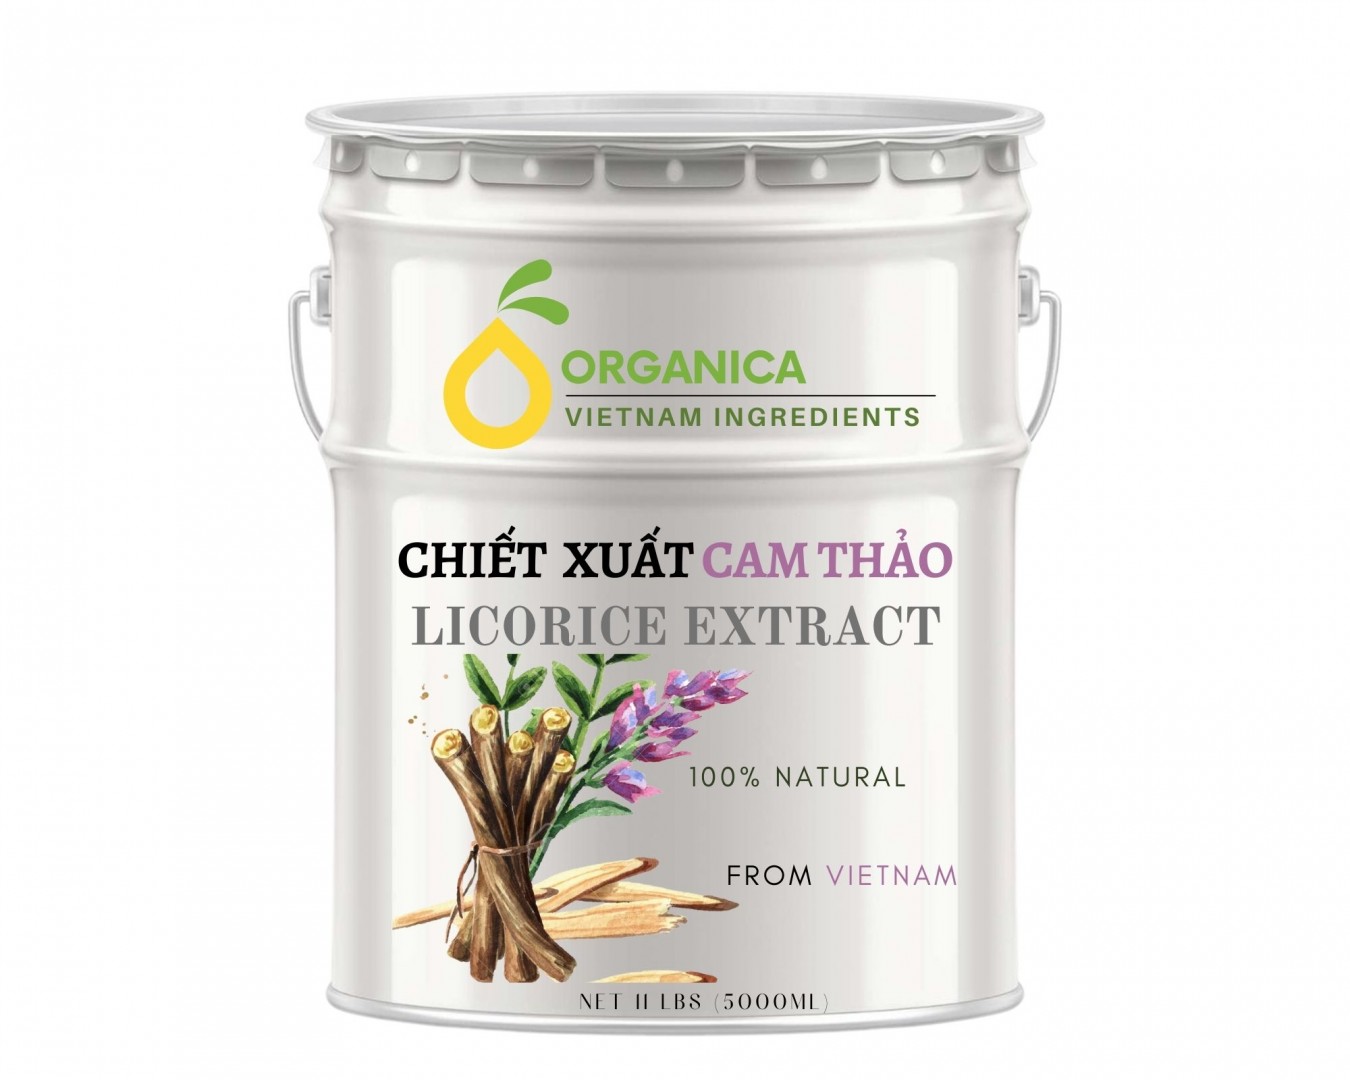 Chiết xuất cam thảo (Licorice extract)